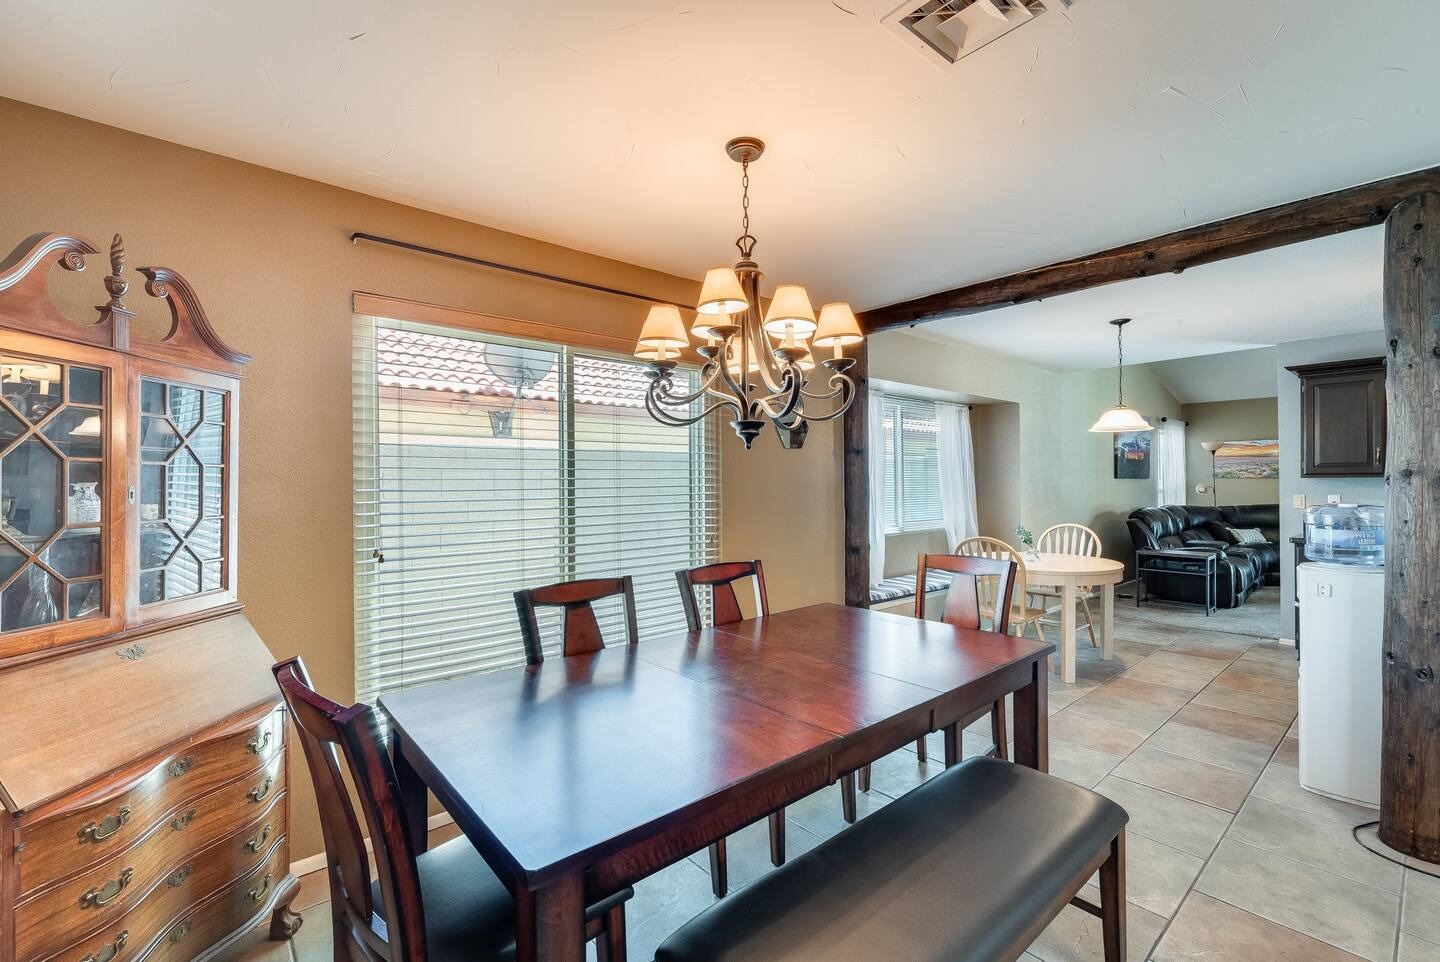 Glendale Vacation Rentals, Cahill Casa - Dining table fit for 6 guests.